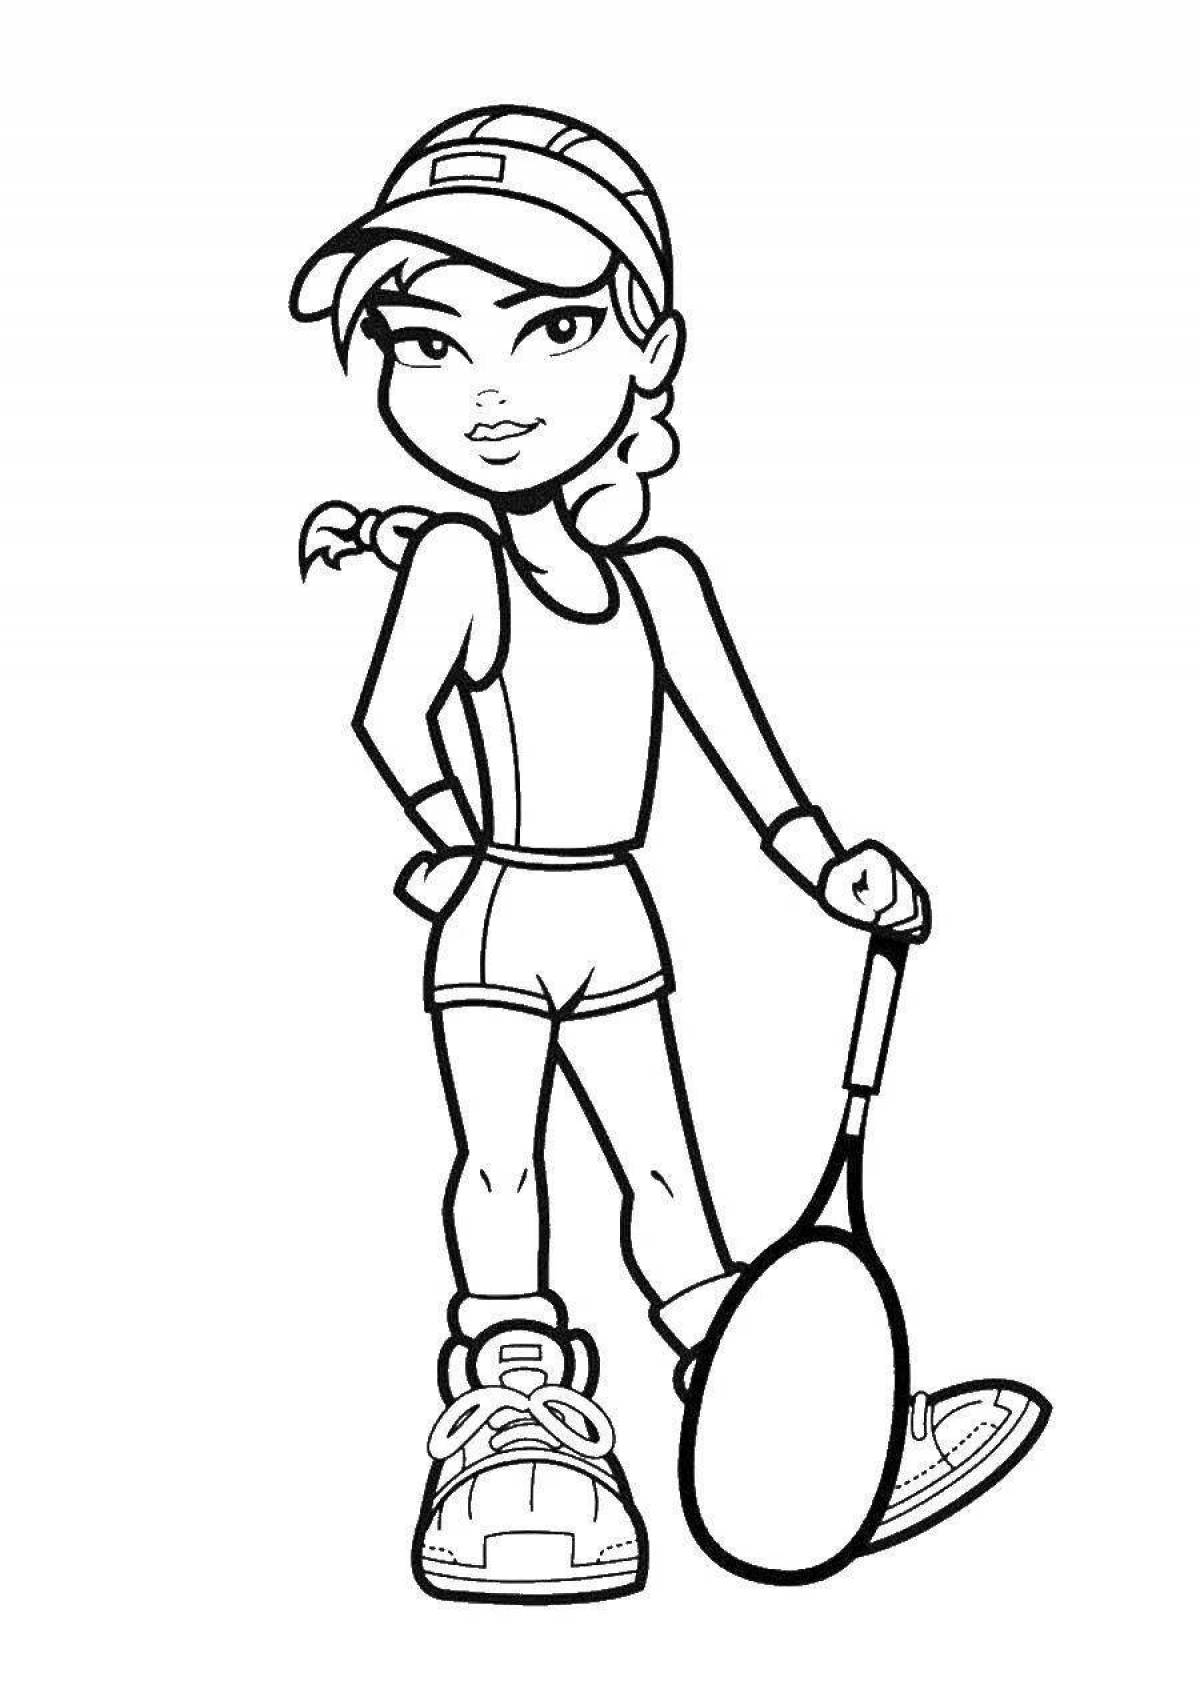 Charming coach coloring page